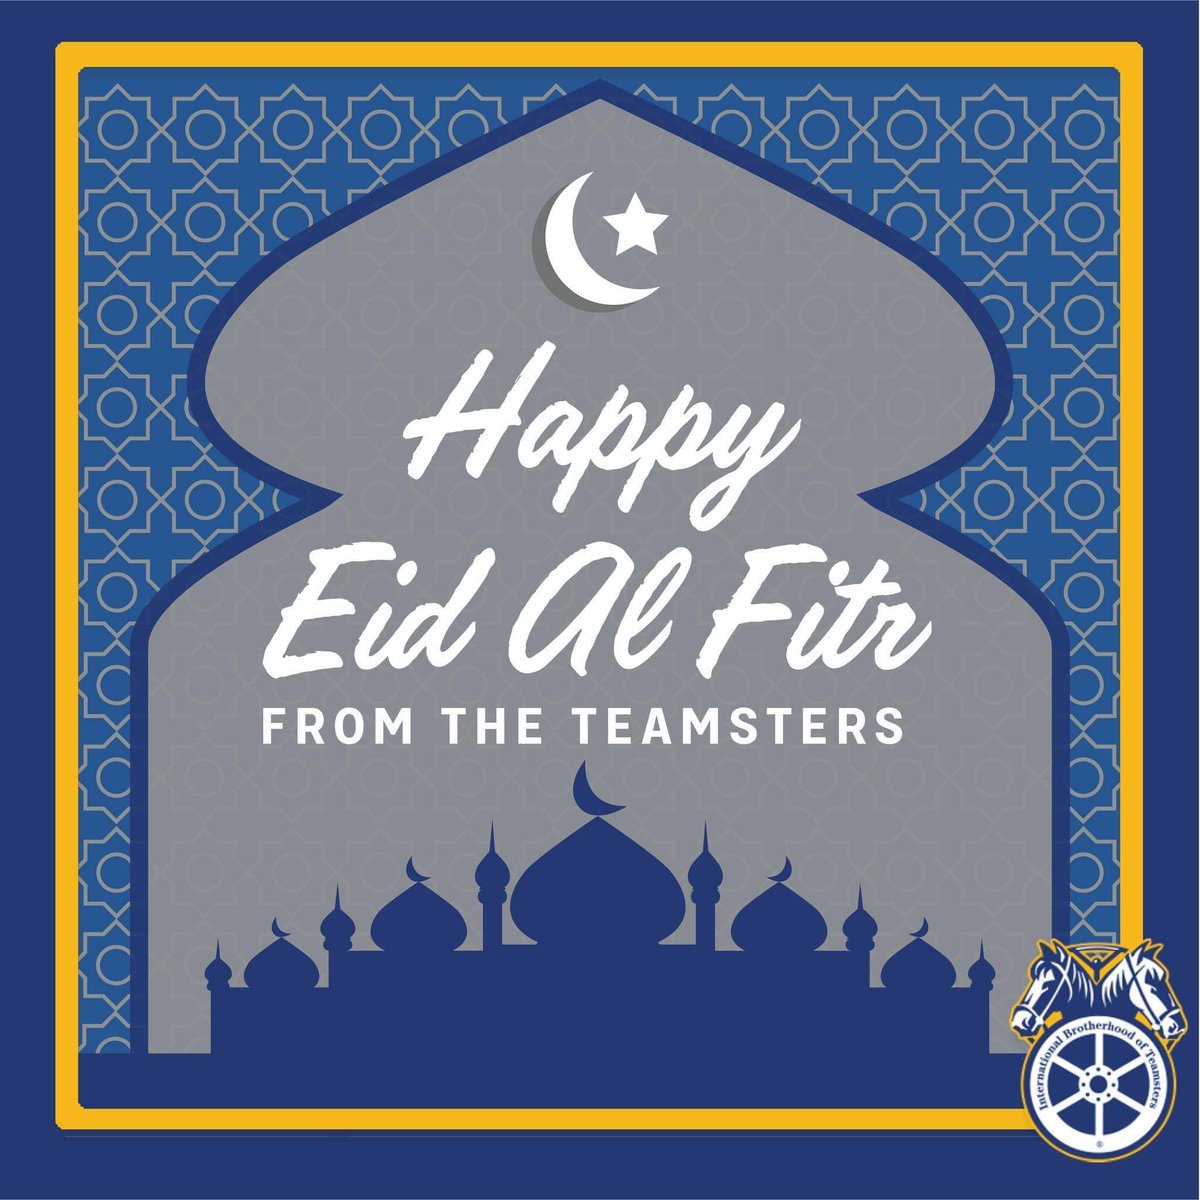 Eid Mubarak from Local 2010! We wish all our members and allies a happy and healthy night with family, friends, and good food.